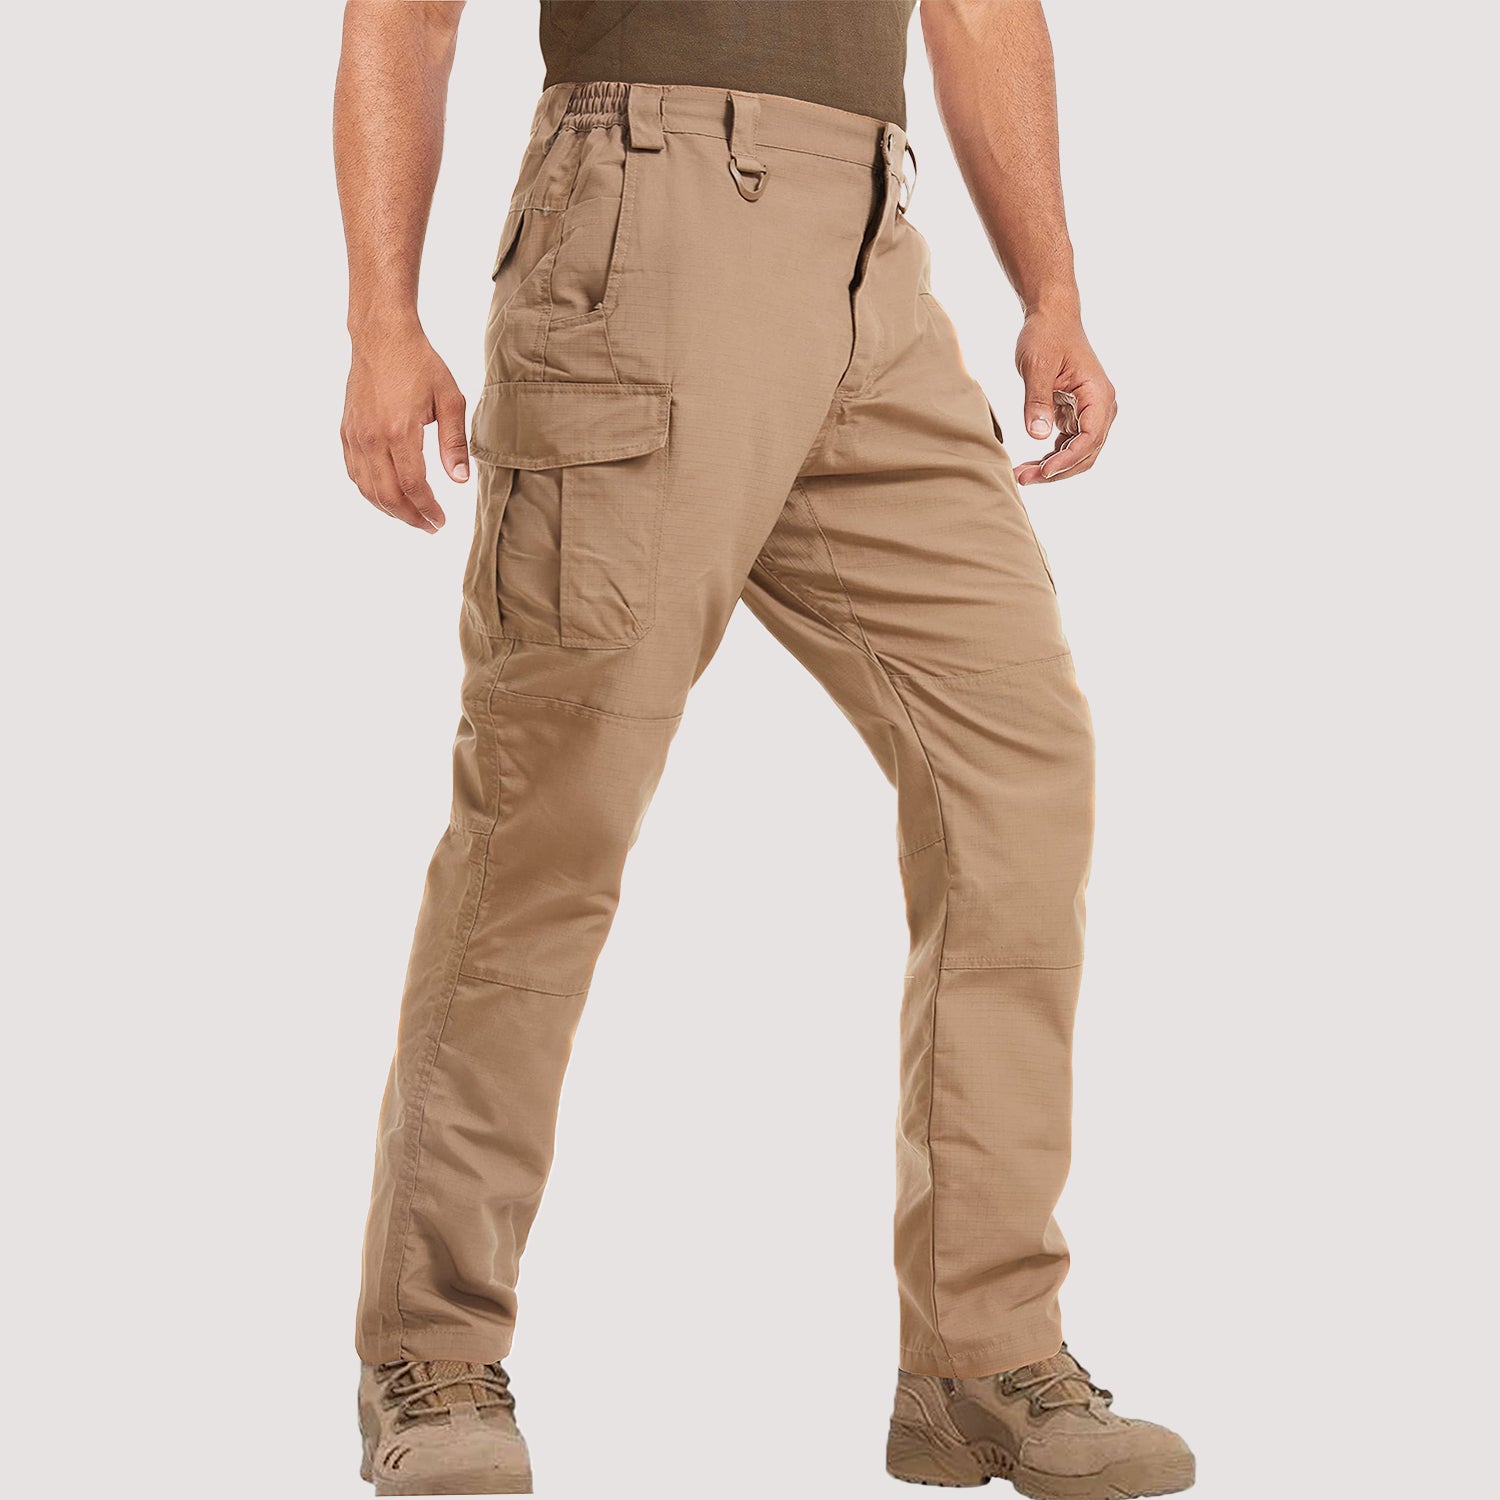 Men's Tactical 9 Pockets Ripstop Cargo Pants for Work, Hiking, Hunting pants